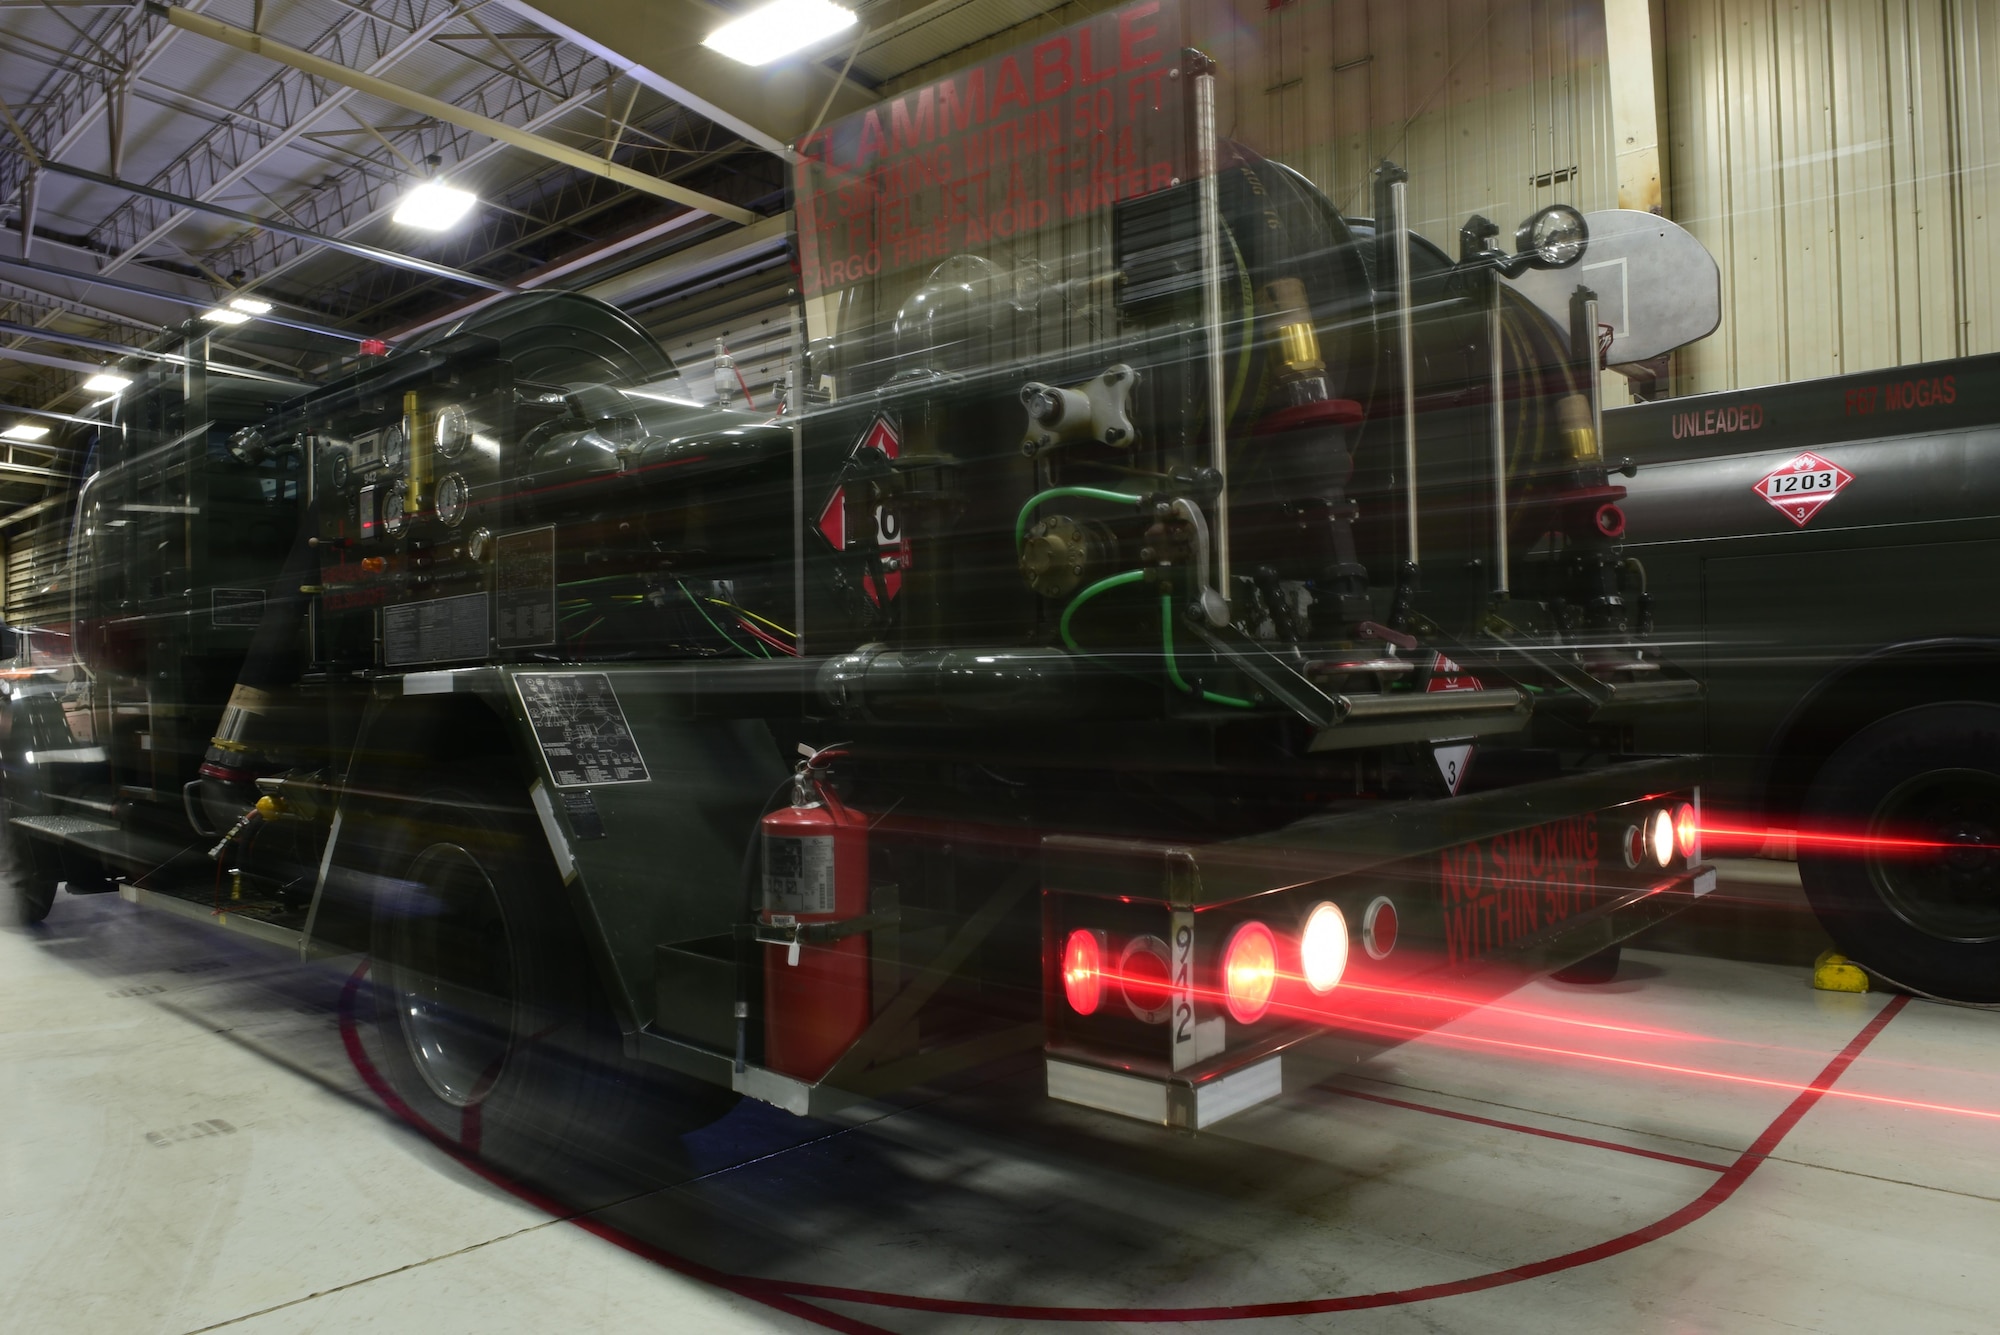 A 28th Logistics Readiness Squadron fuels vehicle is tested by a preventative maintenance team before it goes out for the day at Ellsworth Air Force Base, S.D., Dec. 14, 2016. Each vehicle goes through an inspection to ensure all the functions work properly to prevent any hindrance to operation tempo. (U.S. Air Force photo by Airman 1st Class James L. Miller)